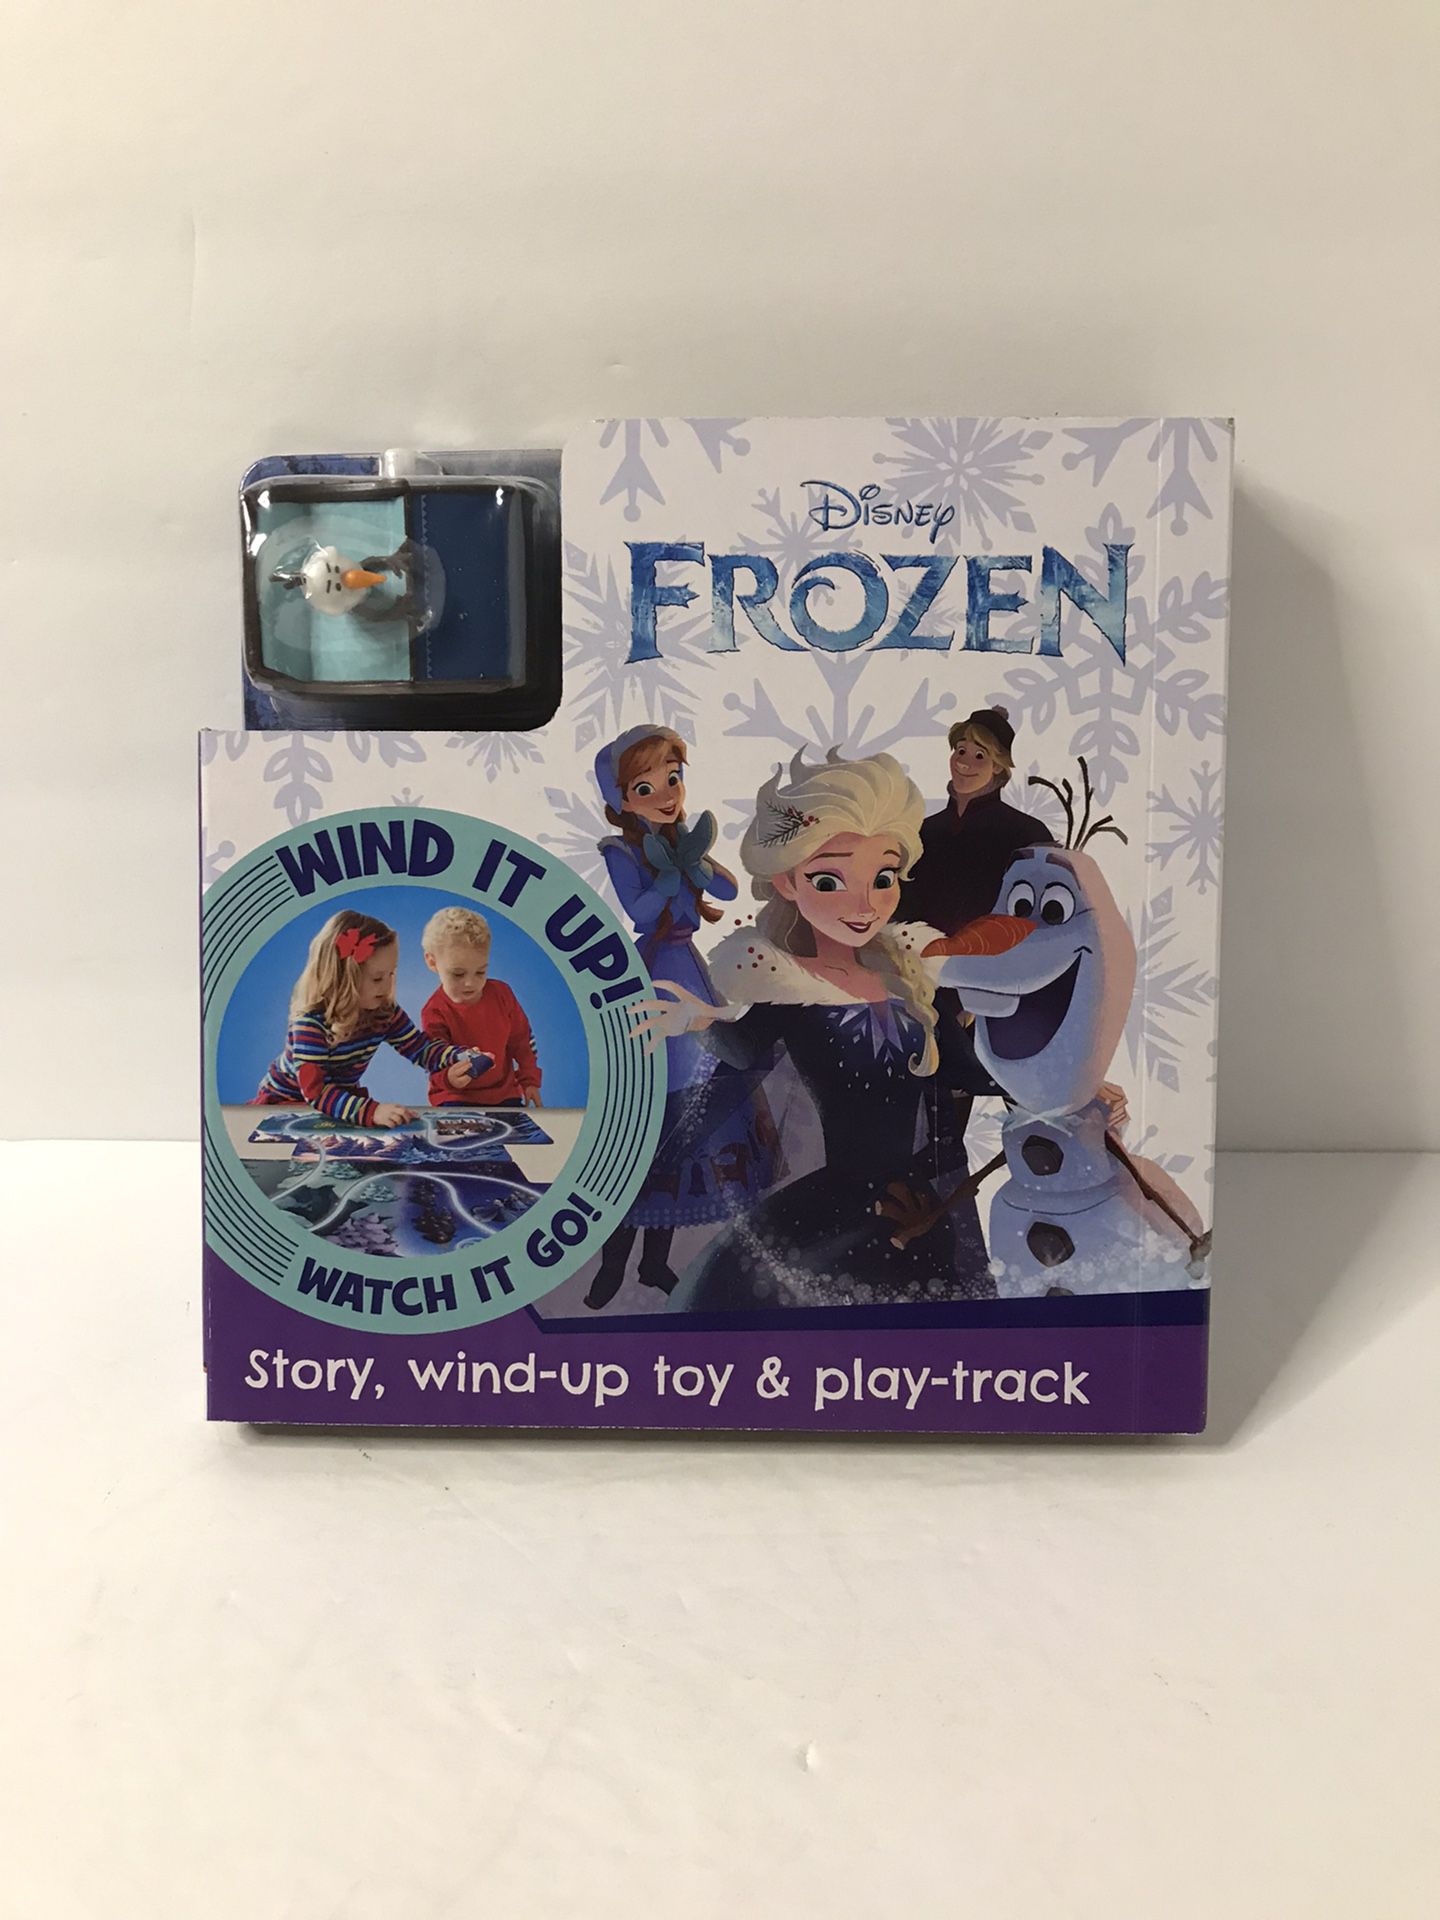 DISNEY FROZEN WIND IT UP & WATCH IT GO  STORY, WIND - UP TOY & PLAY - TRACK BOOK  STORYY BOOK FOR KIDS PLUS A TRACK FOR MORE FUN